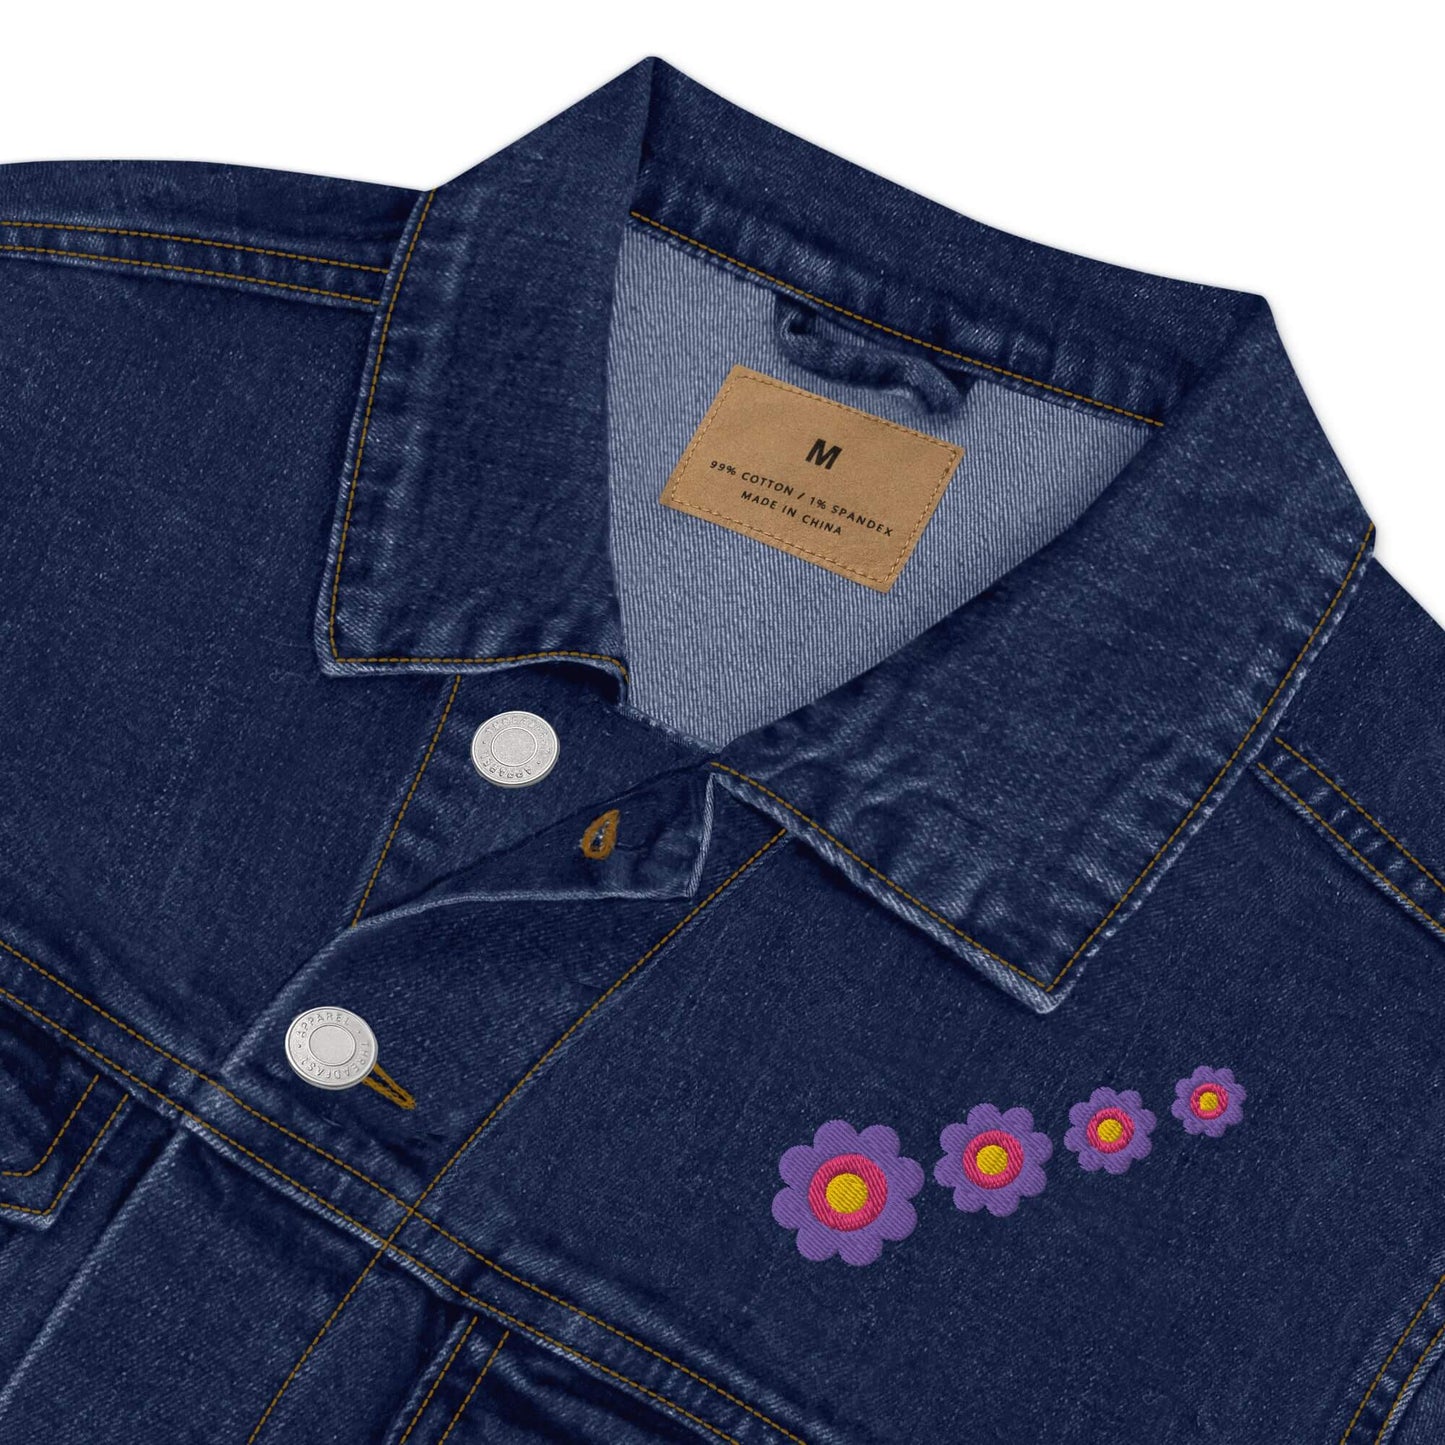 denim-jacket-with-patches